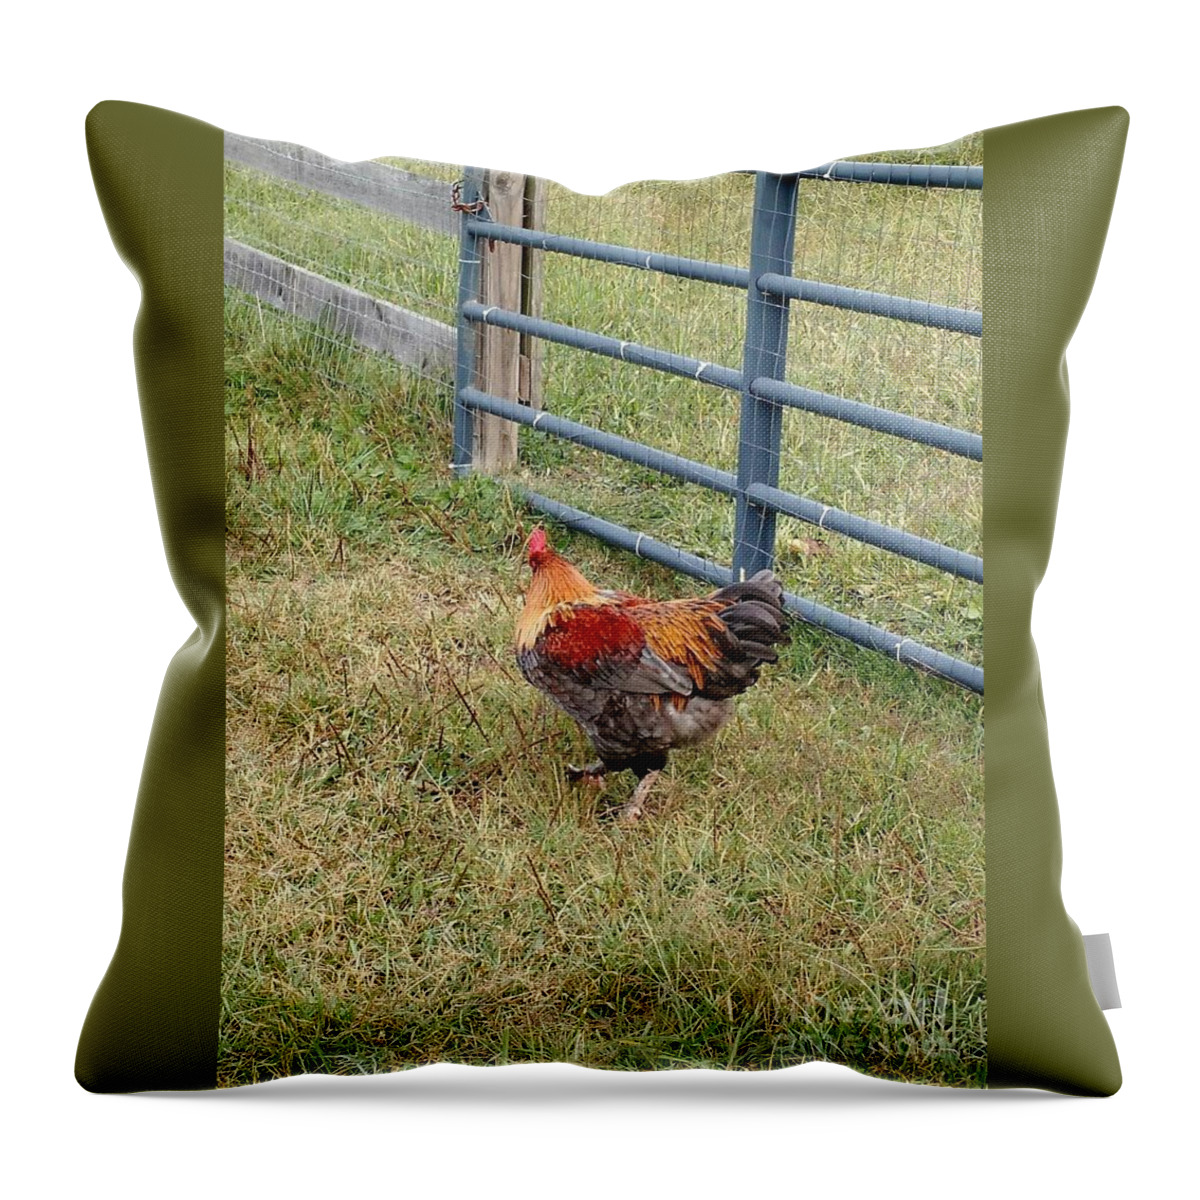 Chicken Throw Pillow featuring the photograph Colorful Chicken by Anita Adams